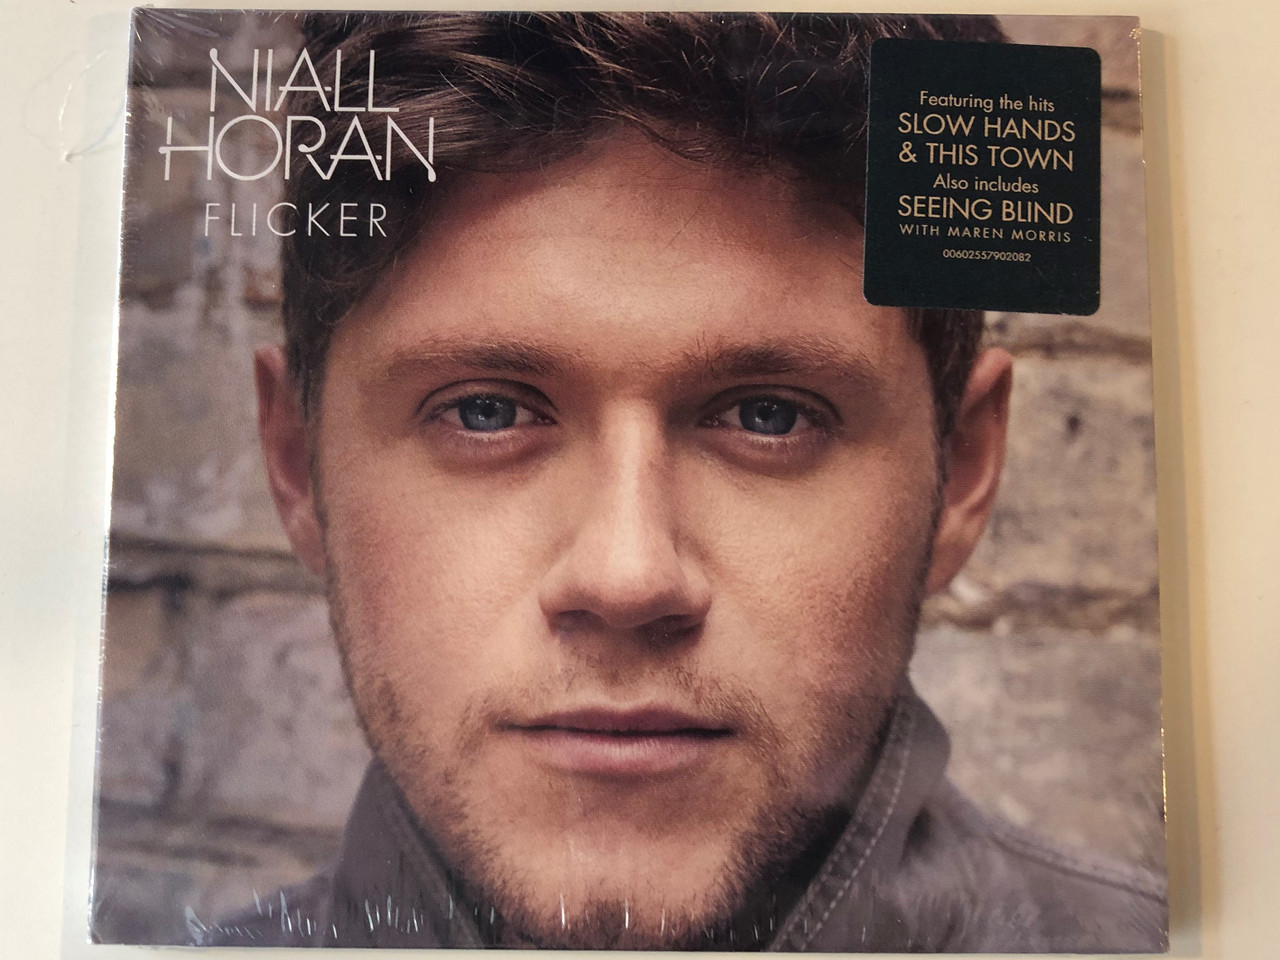 Niall Horan ‎– Flicker / Featuring the hits Slow Hands & This Town ...